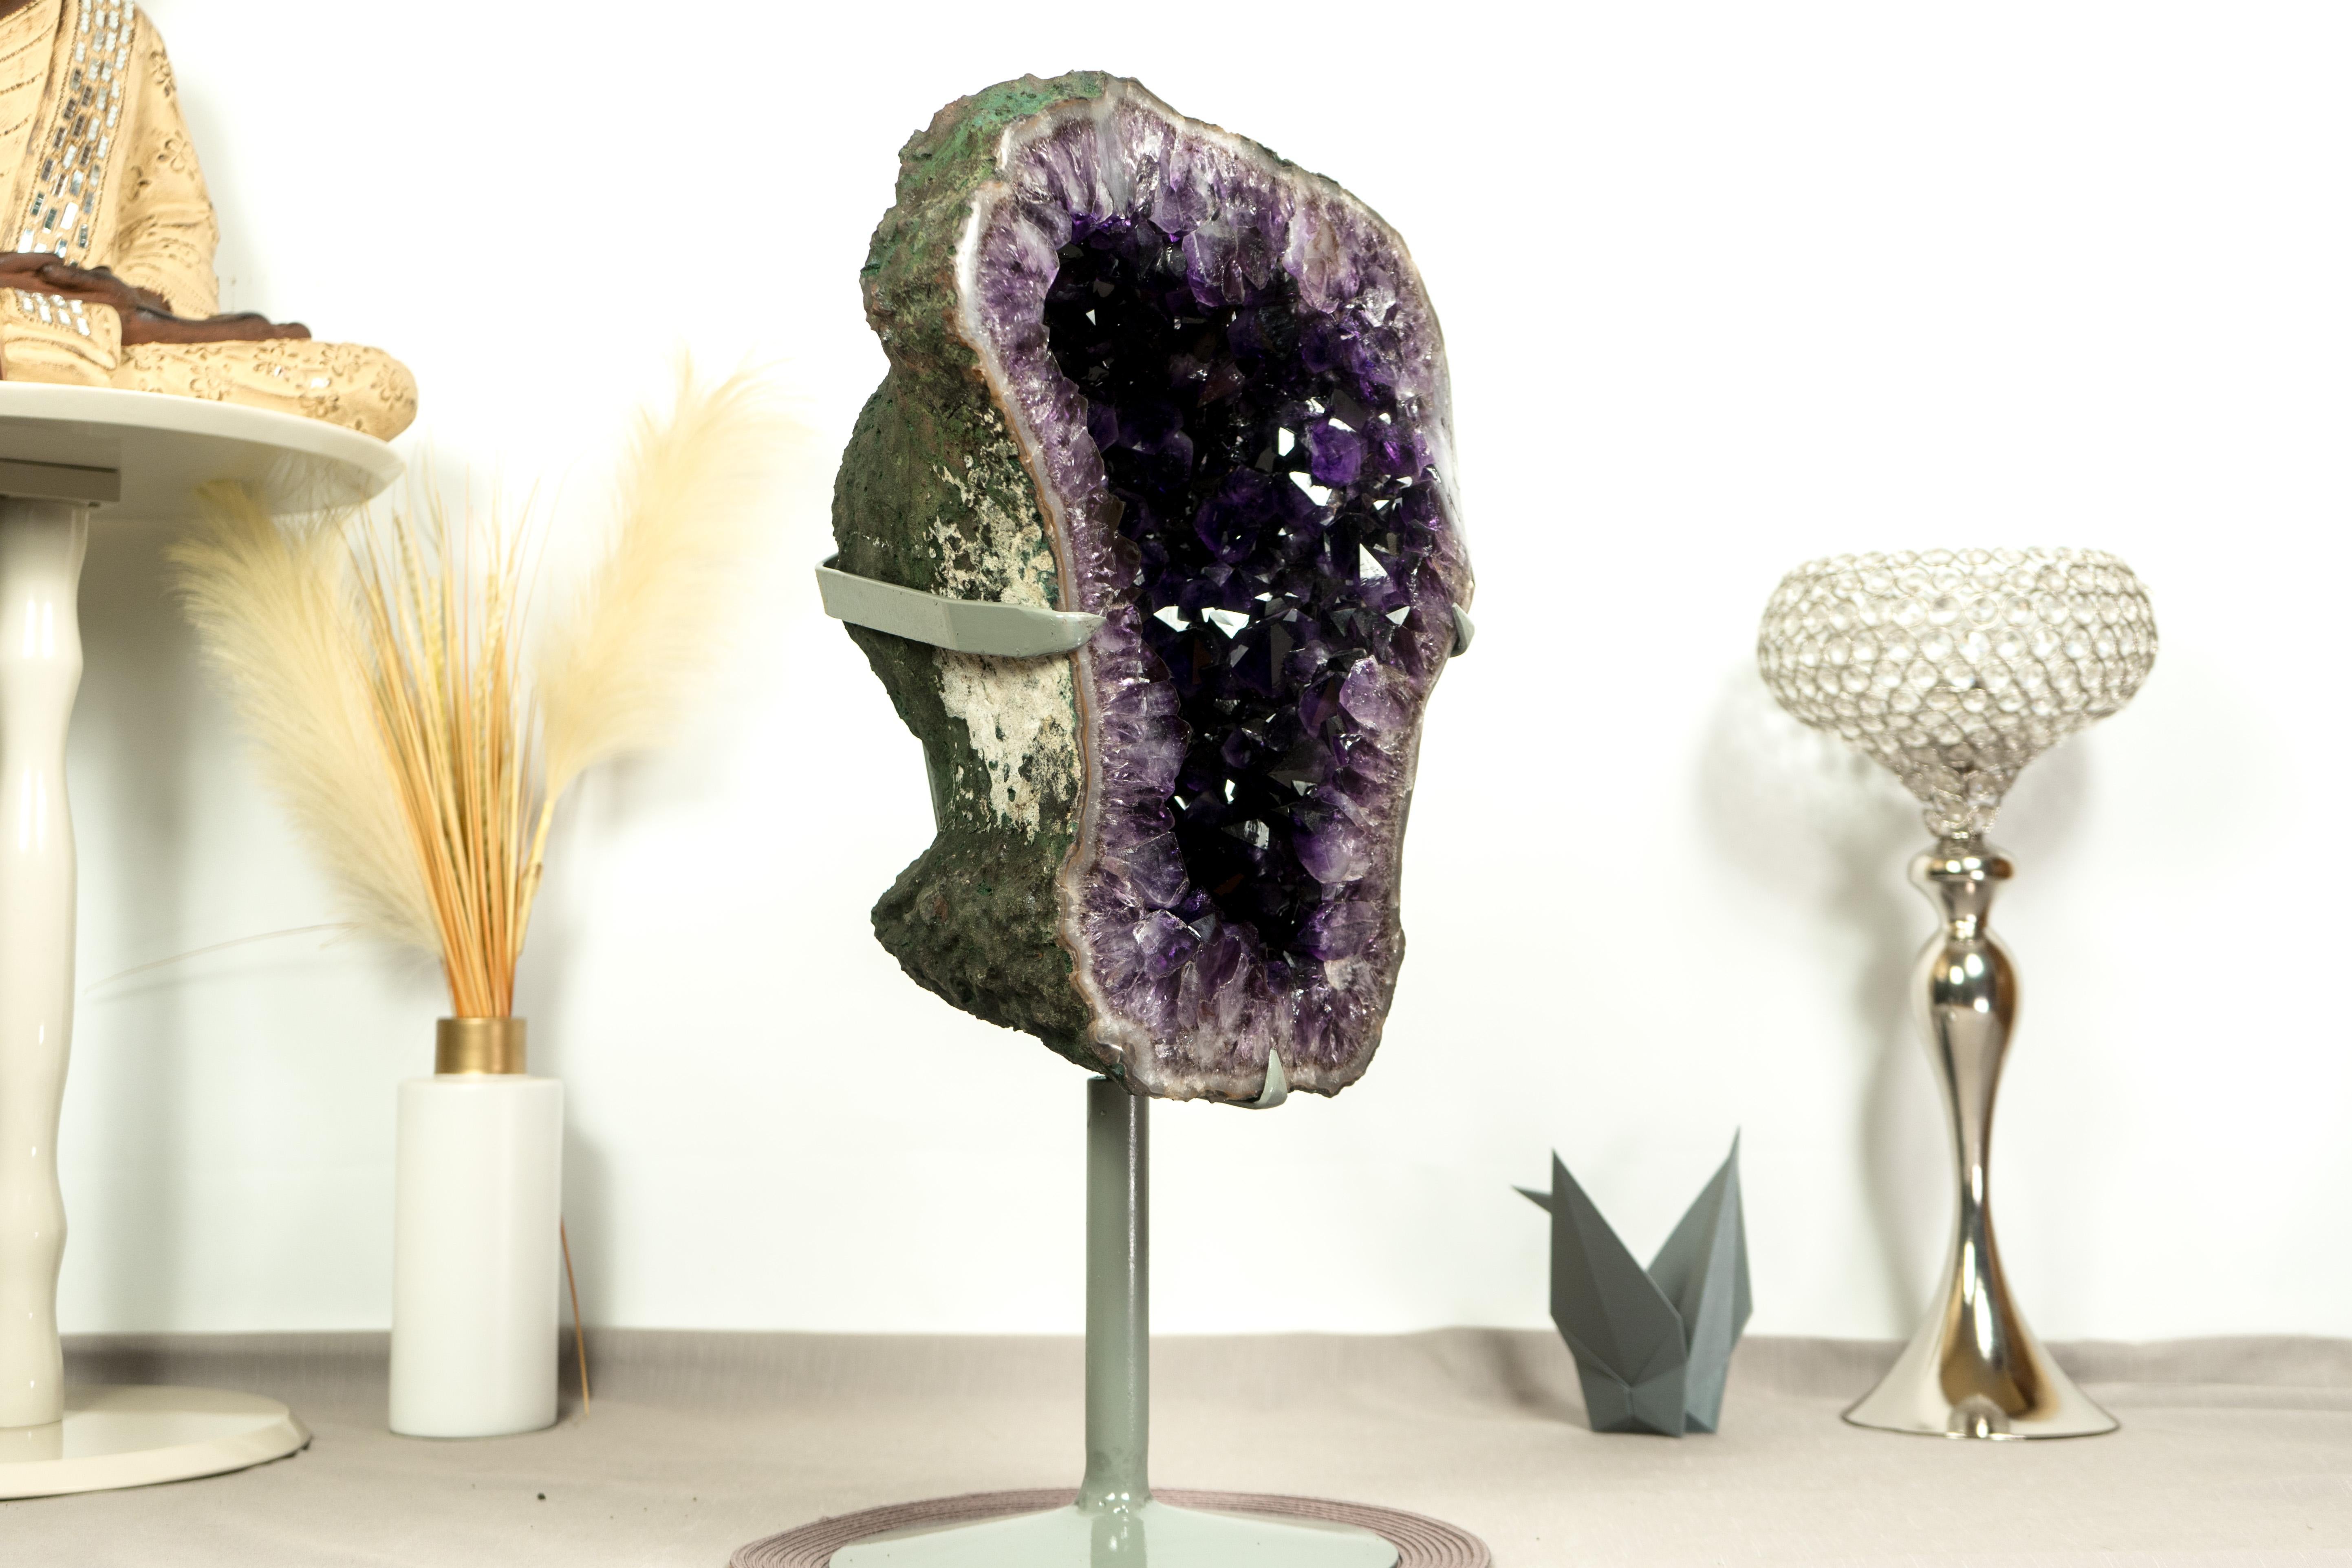 Spectacular! This Amethyst Geode is one of the most aesthetically pleasant Amethyst Geodes we have had the chance to work with. With elegant grandeur, this rare amethyst is ready to become a centerpiece at a gallery, museum, or in your decor,